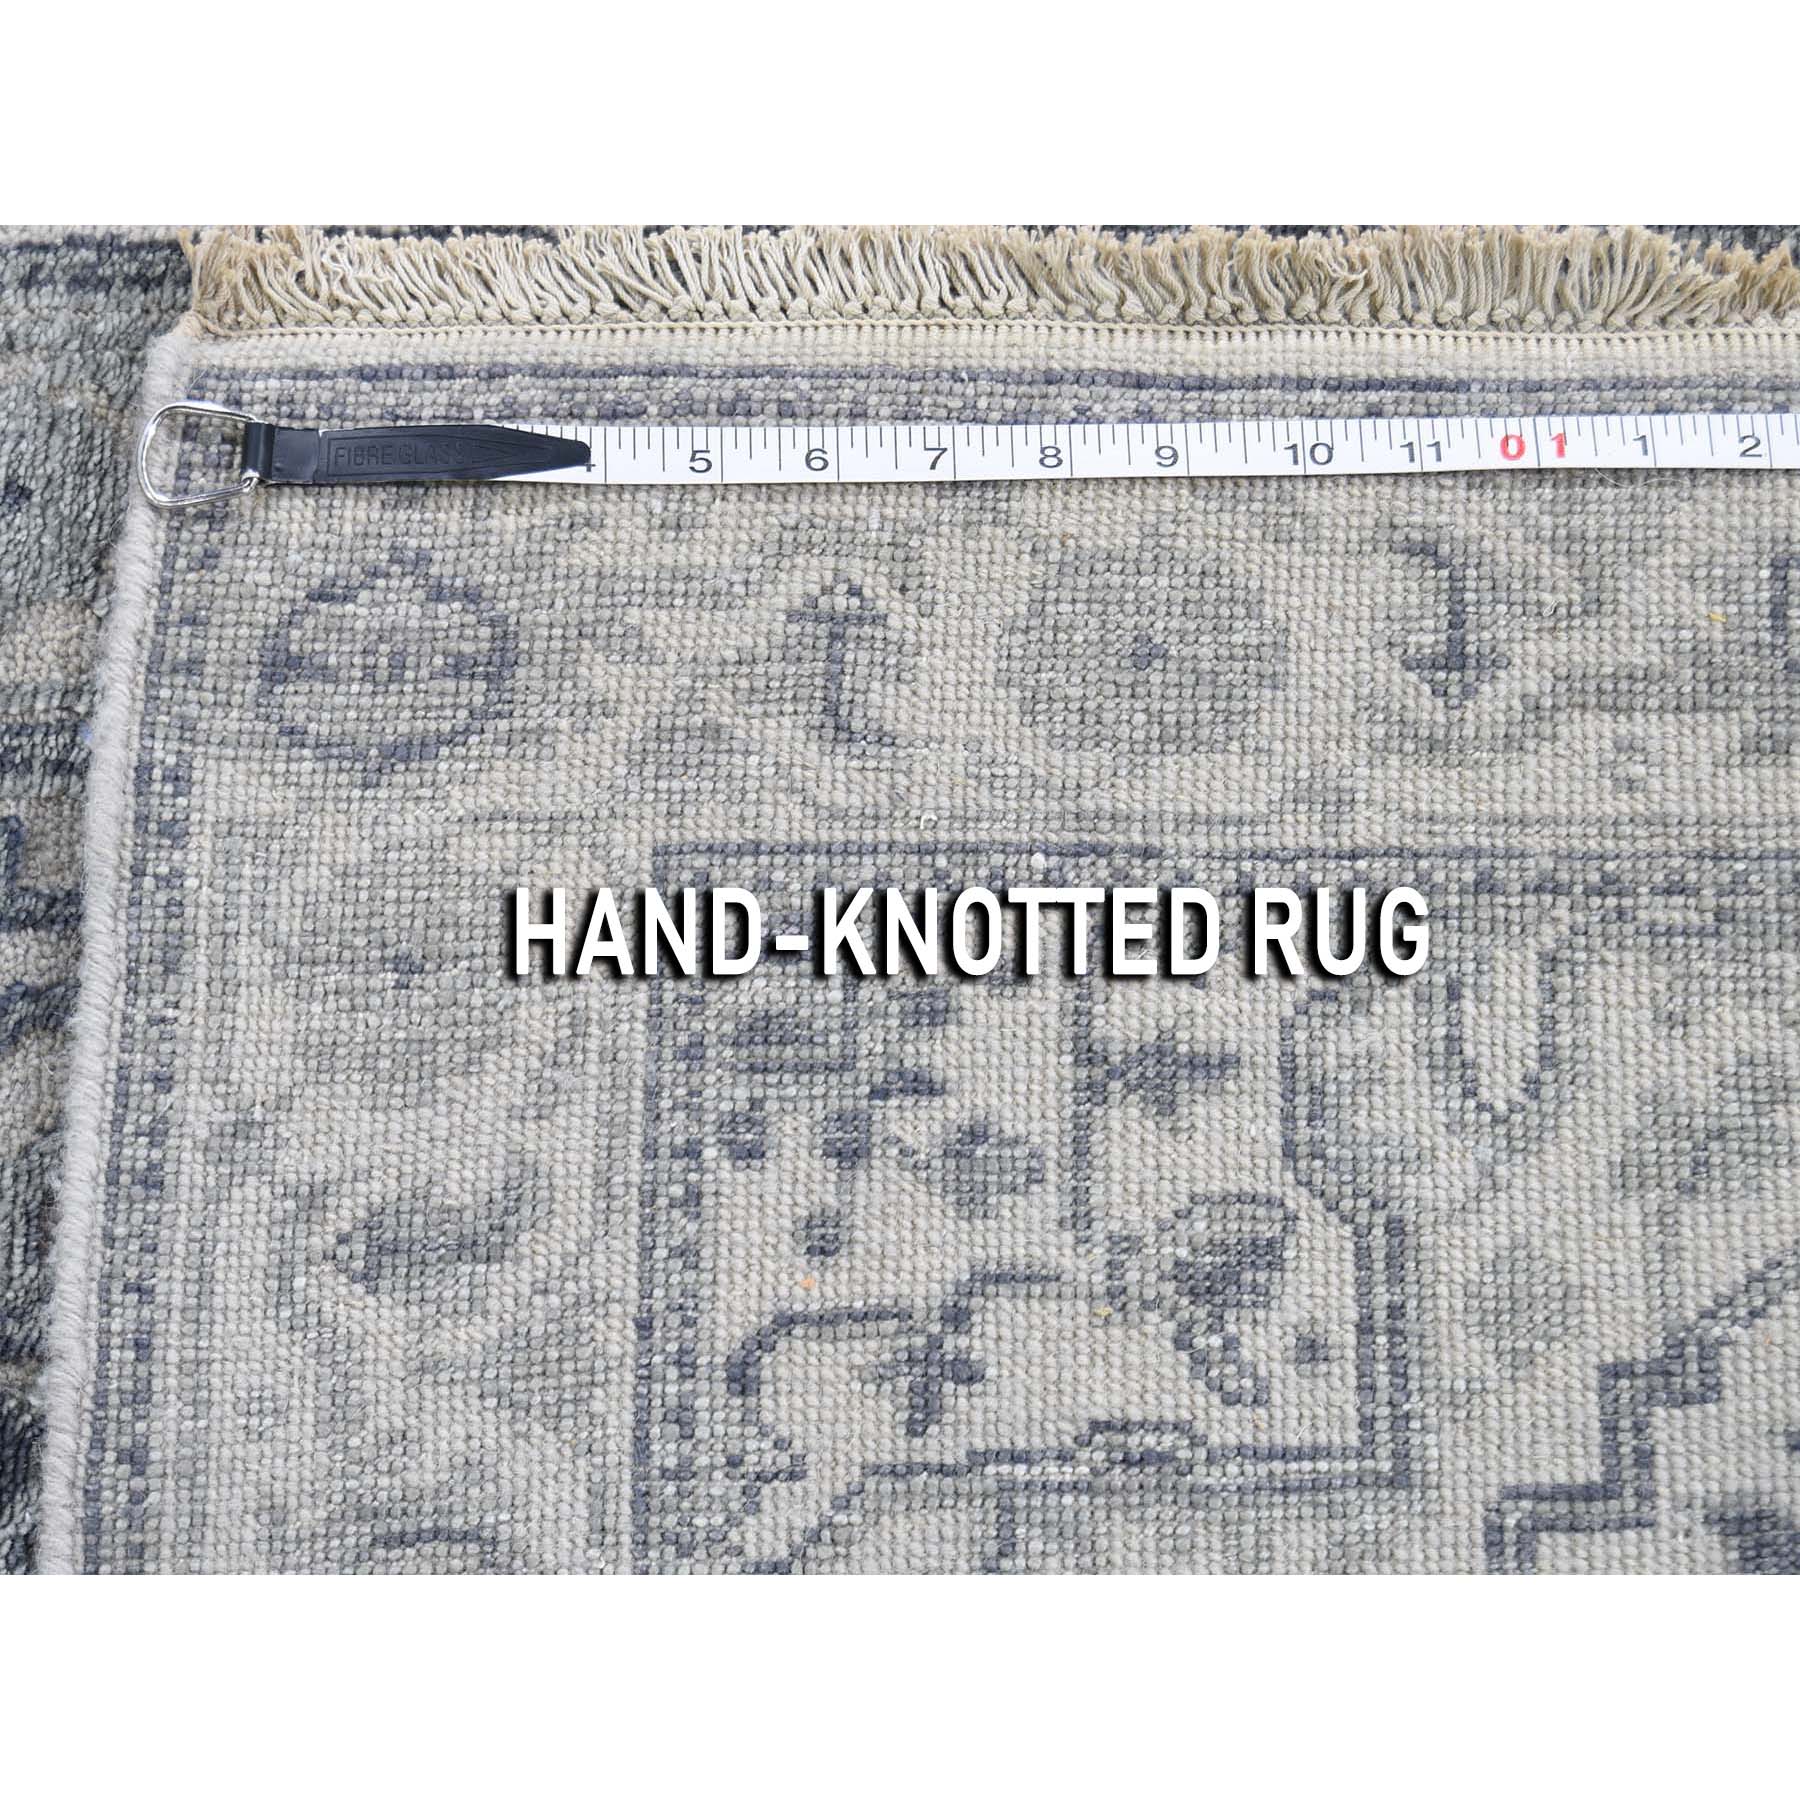 2-6 x8-2  Silver Heriz Design Wool And Silk Hi-lo Pile Runner Hand-Knotted Oriental Rug 